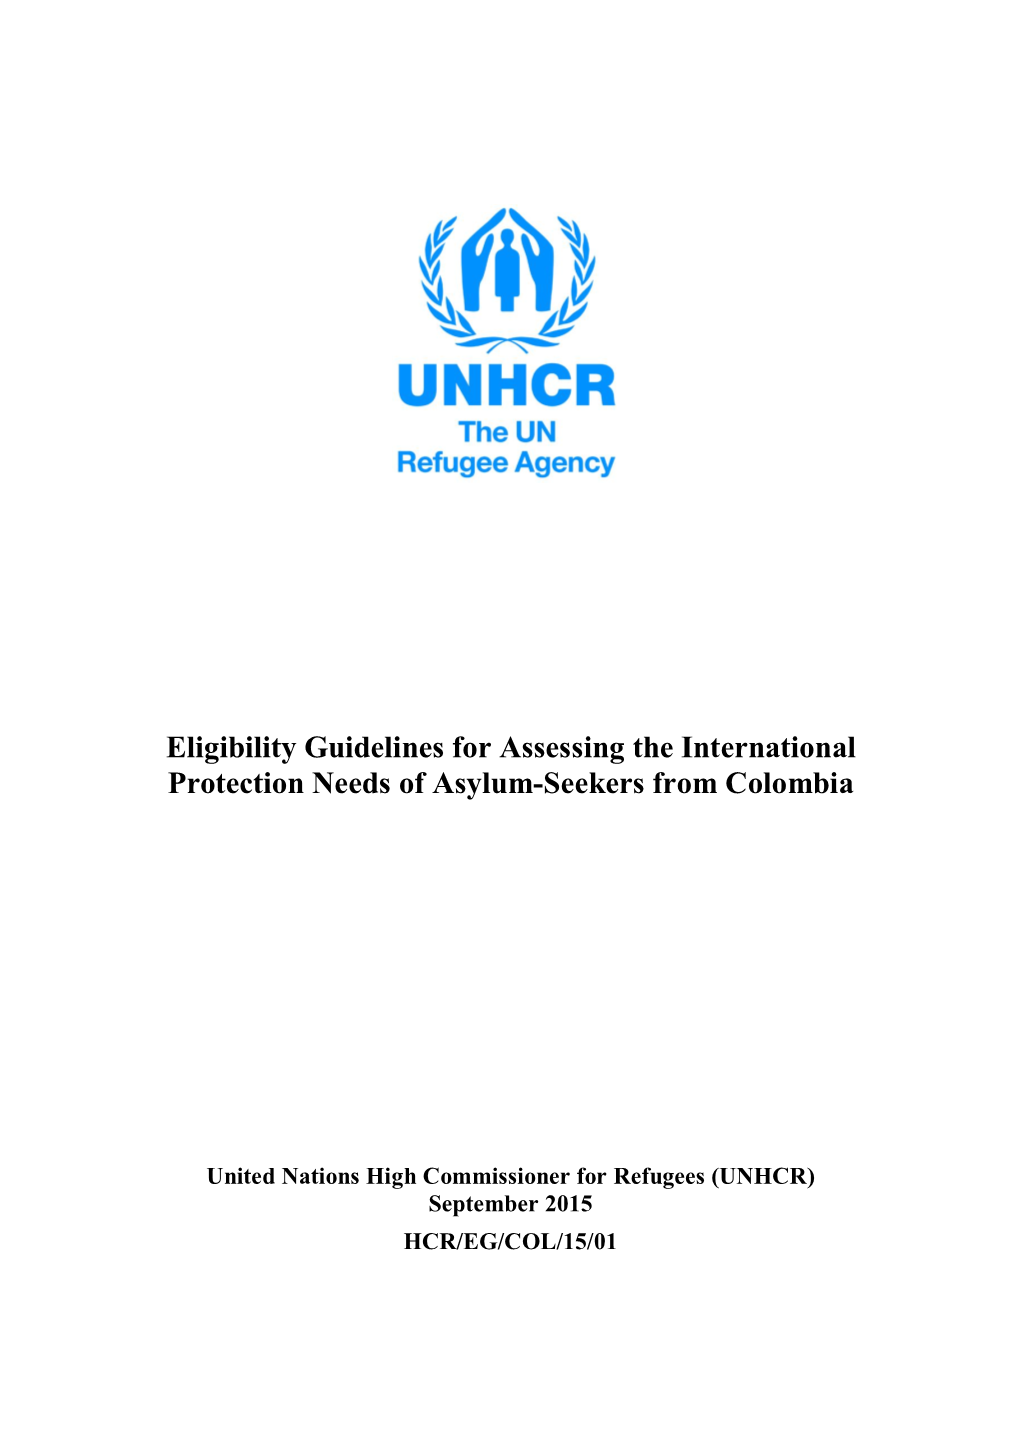 Eligibility Guidelines for Assessing the International Protection Needs of Asylum-Seekers from Colombia